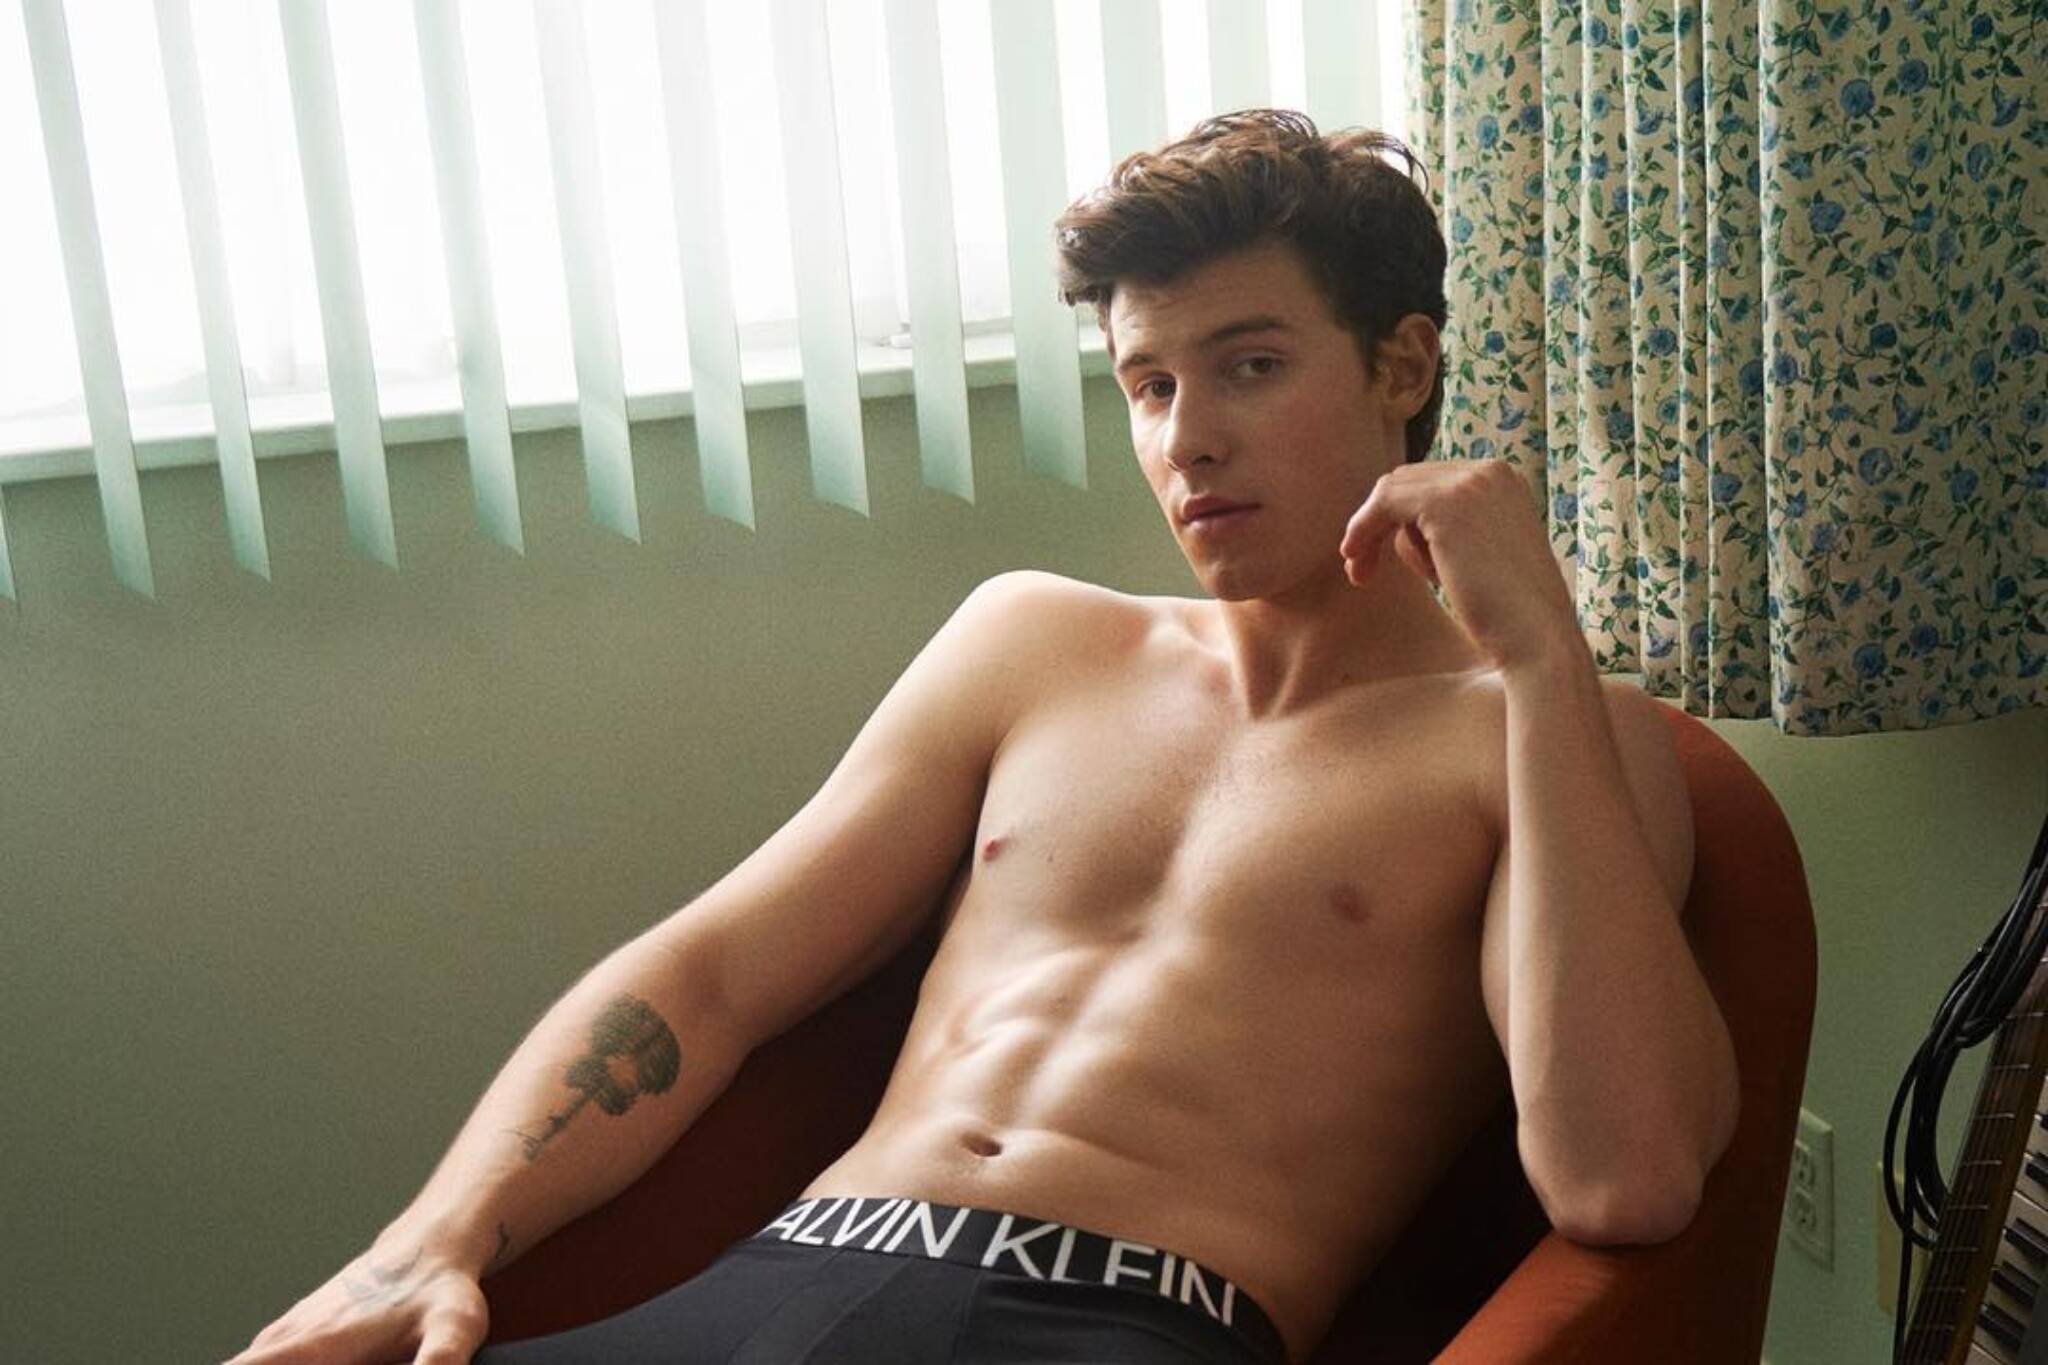 Shawn Mendes is the new face of Calvin Klein underwear